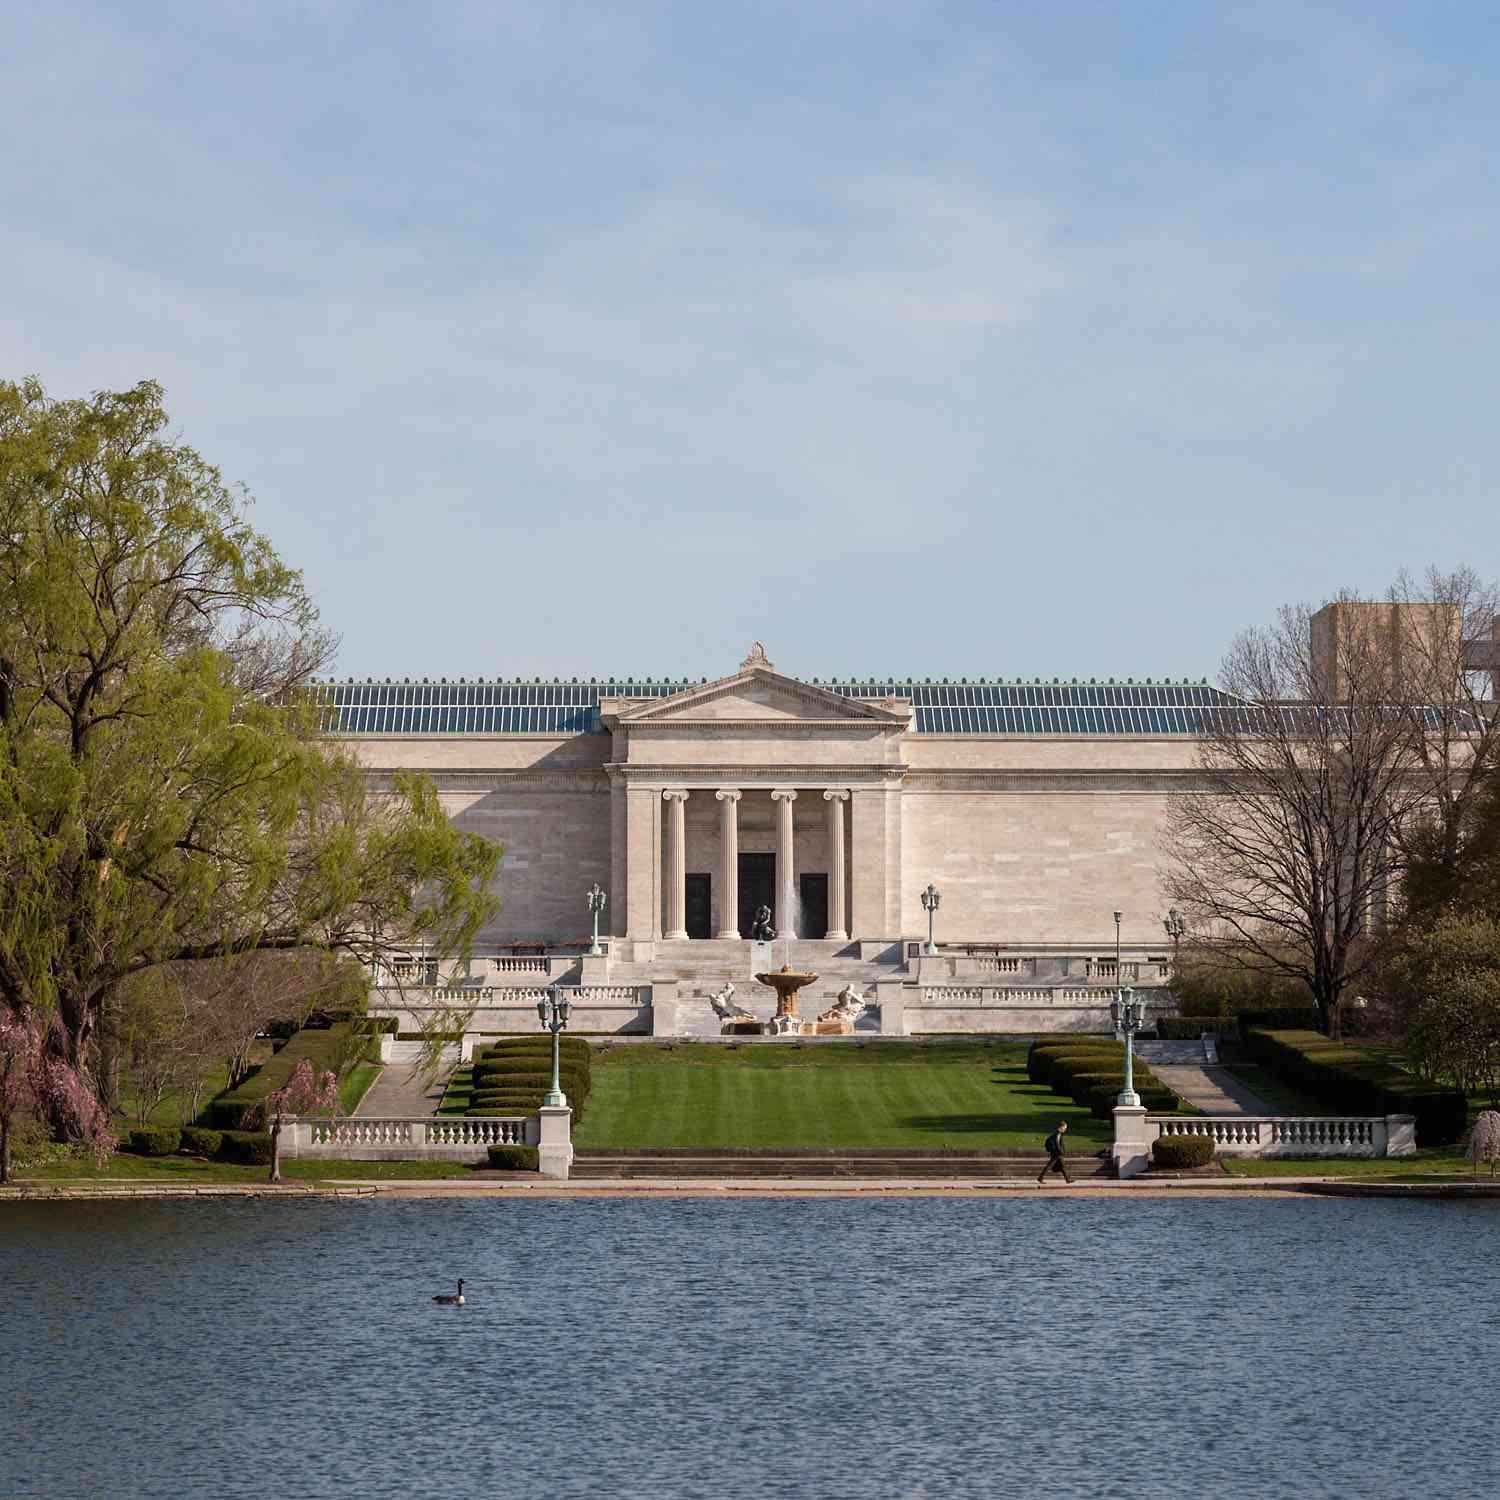 Cleveland: Cleveland Museum of Art